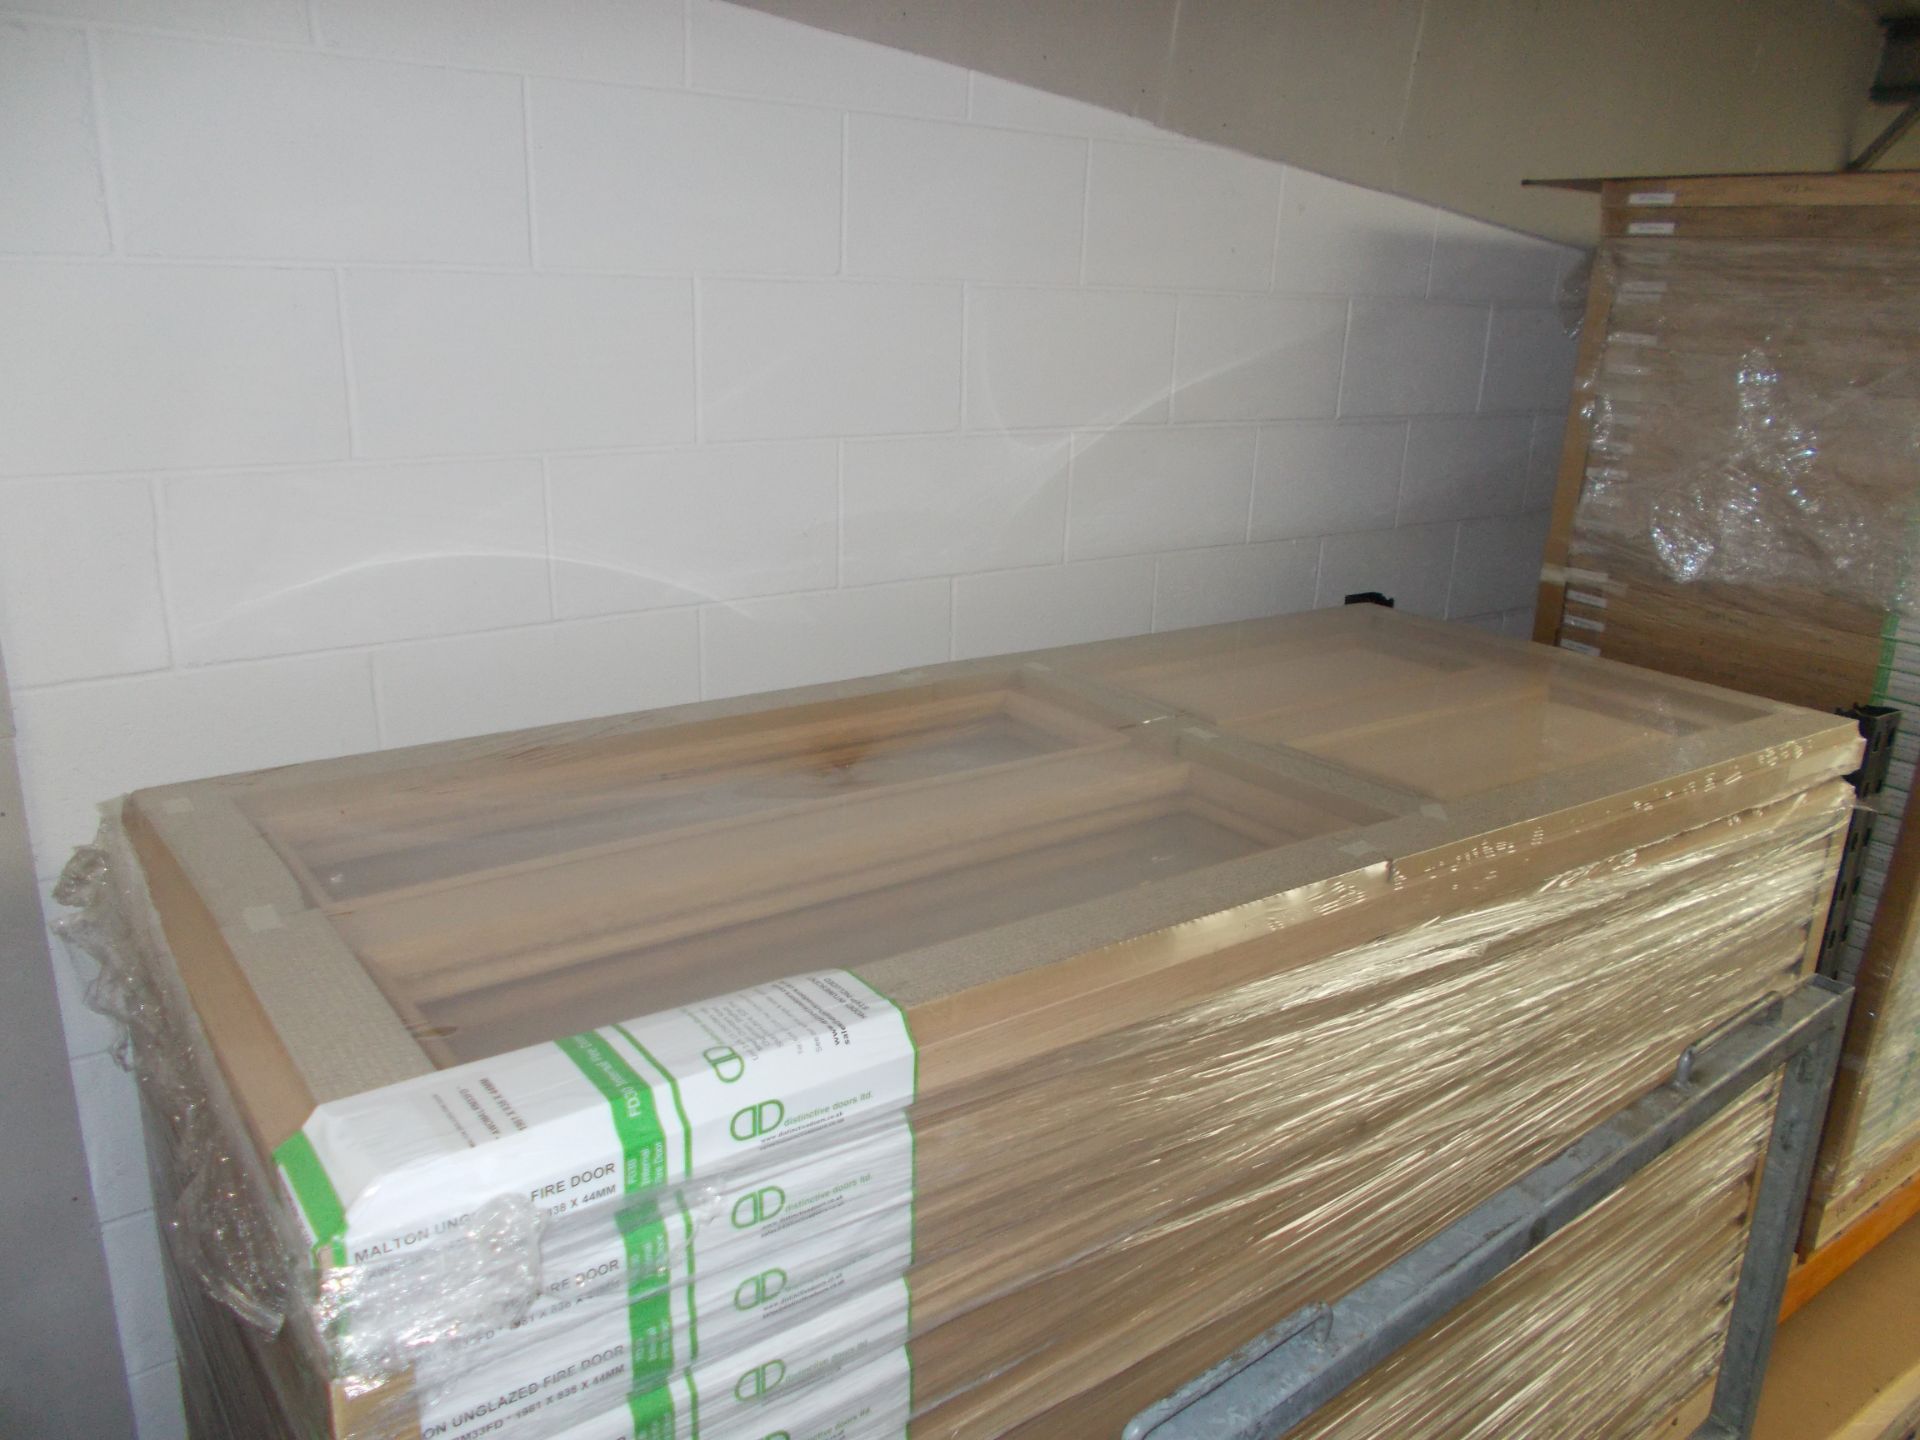 4 x Malton Unglazed Internal Fire Door AWOMLRM27FD 78”x27”x44mm - Lots to be handed out in order - Image 3 of 3